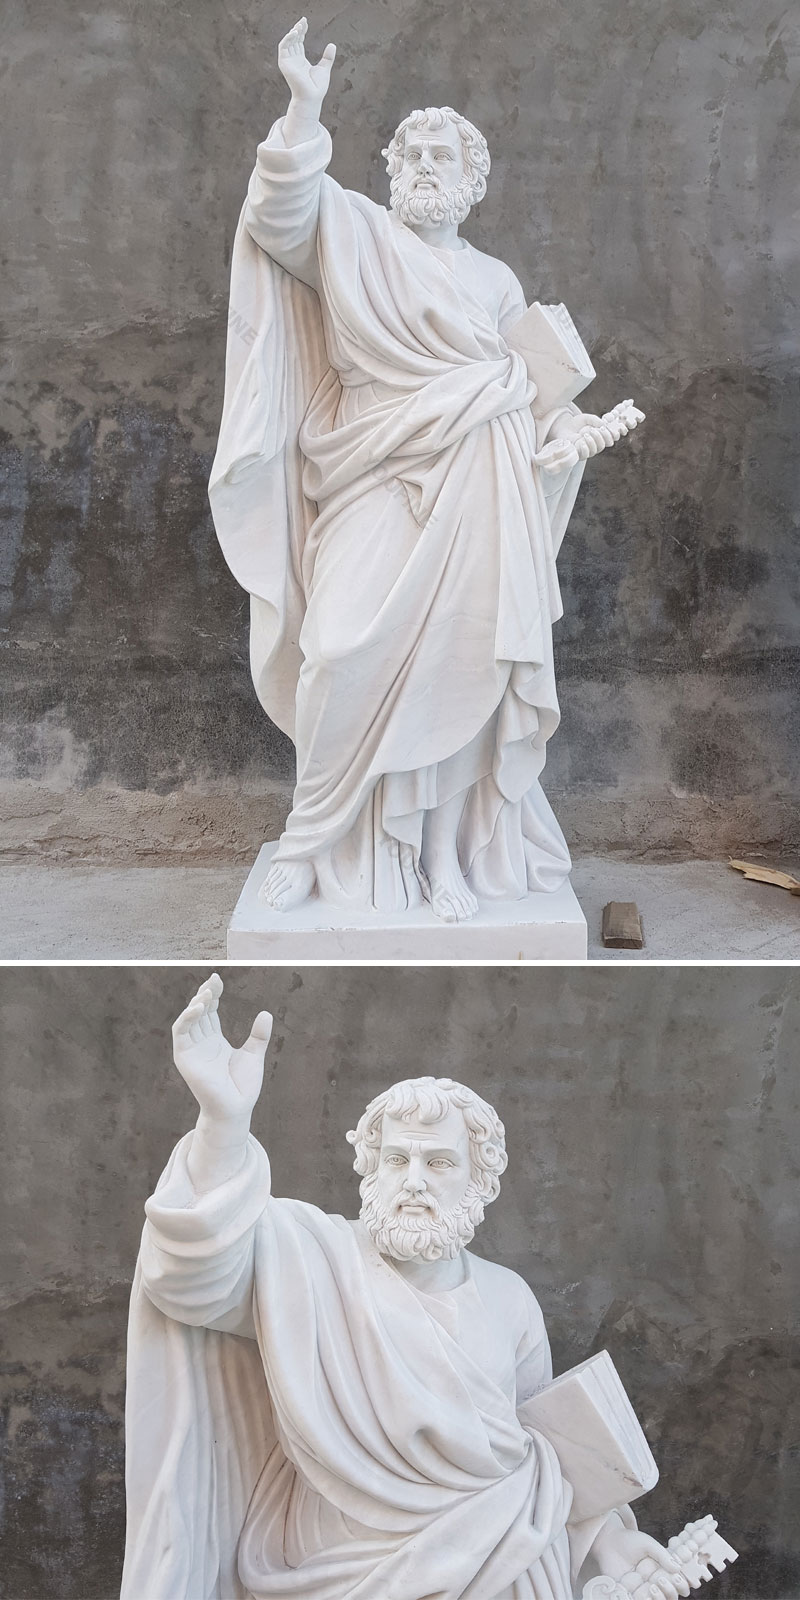 The price religious garden sculpture of Saint Peter for outdoor decoration designs